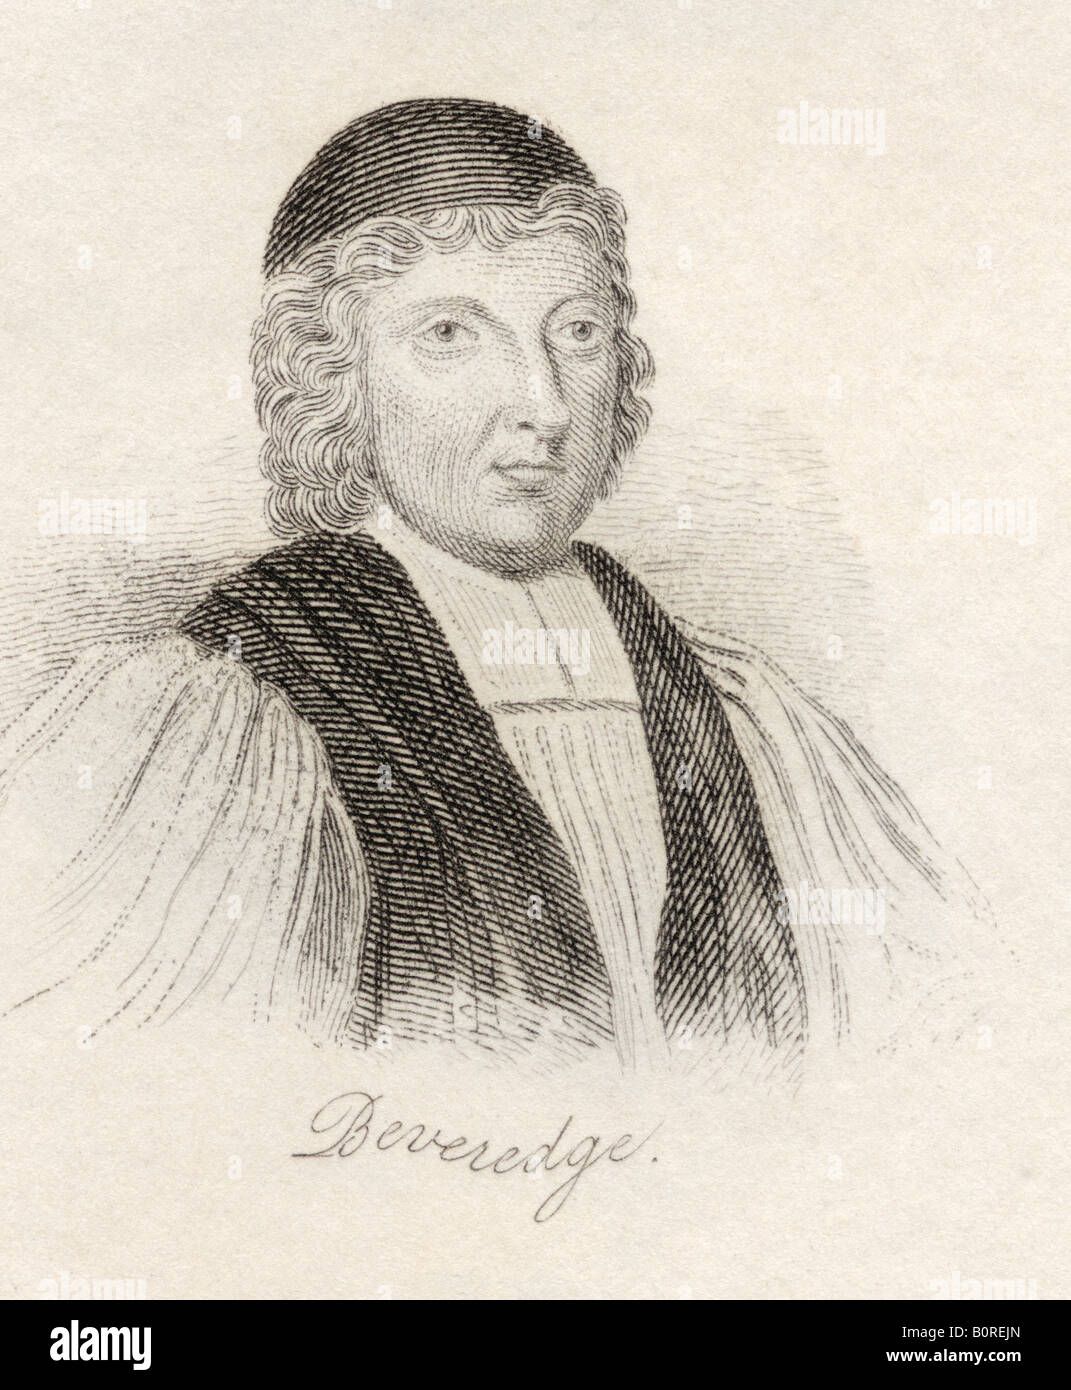 William Beveridge, 1637 - 1708. English writer, clergyman and Bishop of St Asaph. From the book Crabbs Historical Dictionary, published 1825. Stock Photo